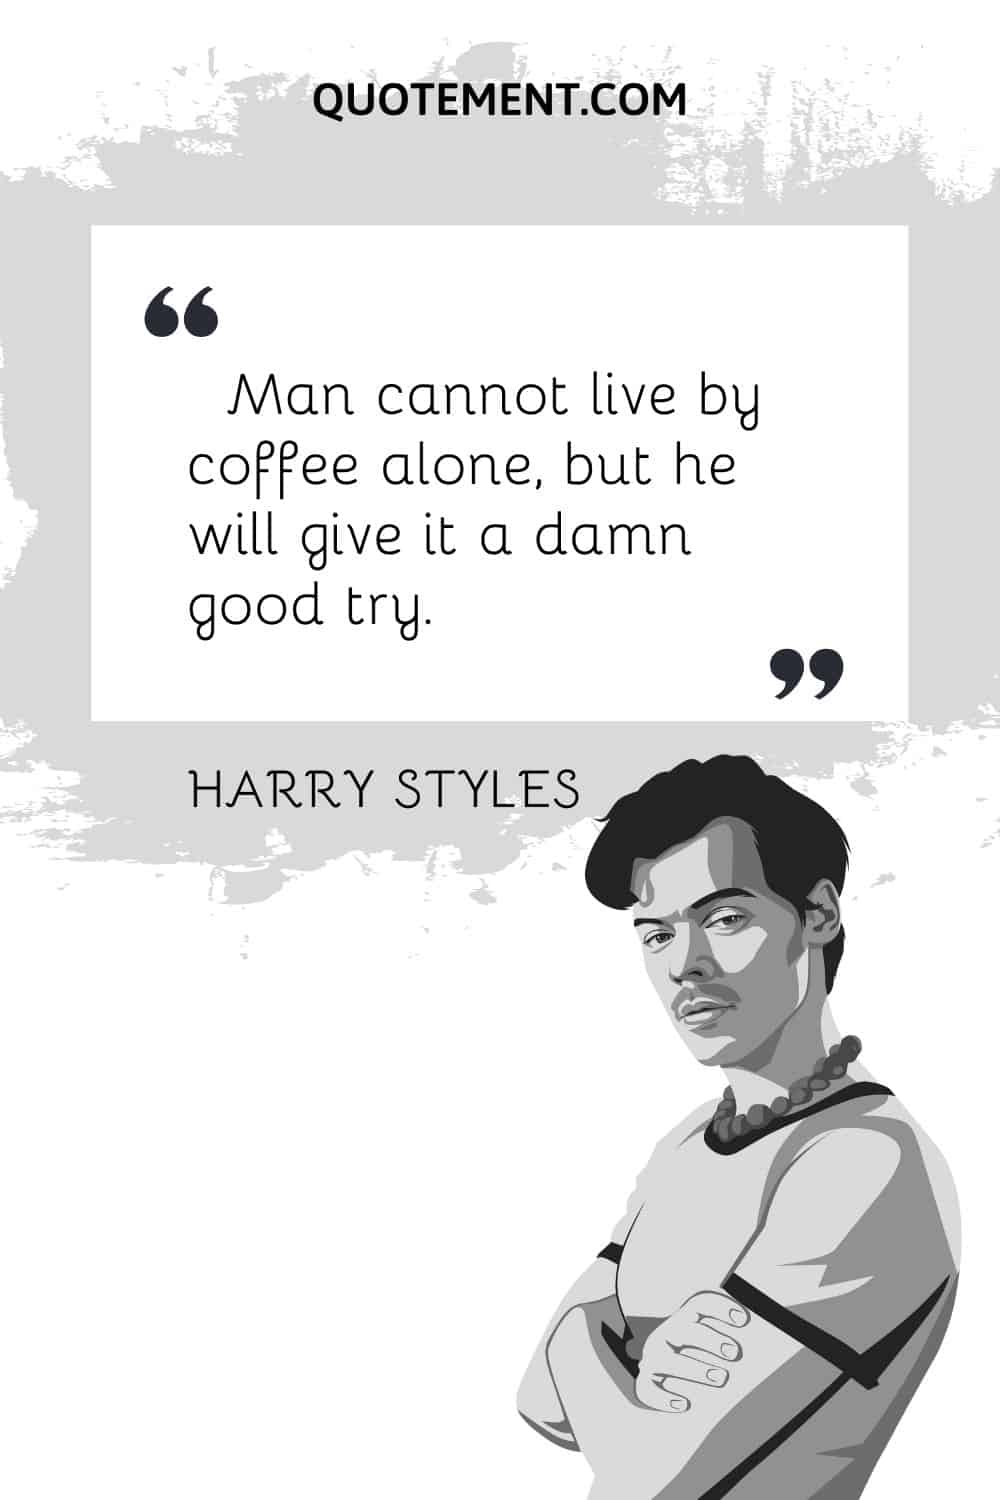 Man cannot live by coffee alone, but he will give it a damn good try.